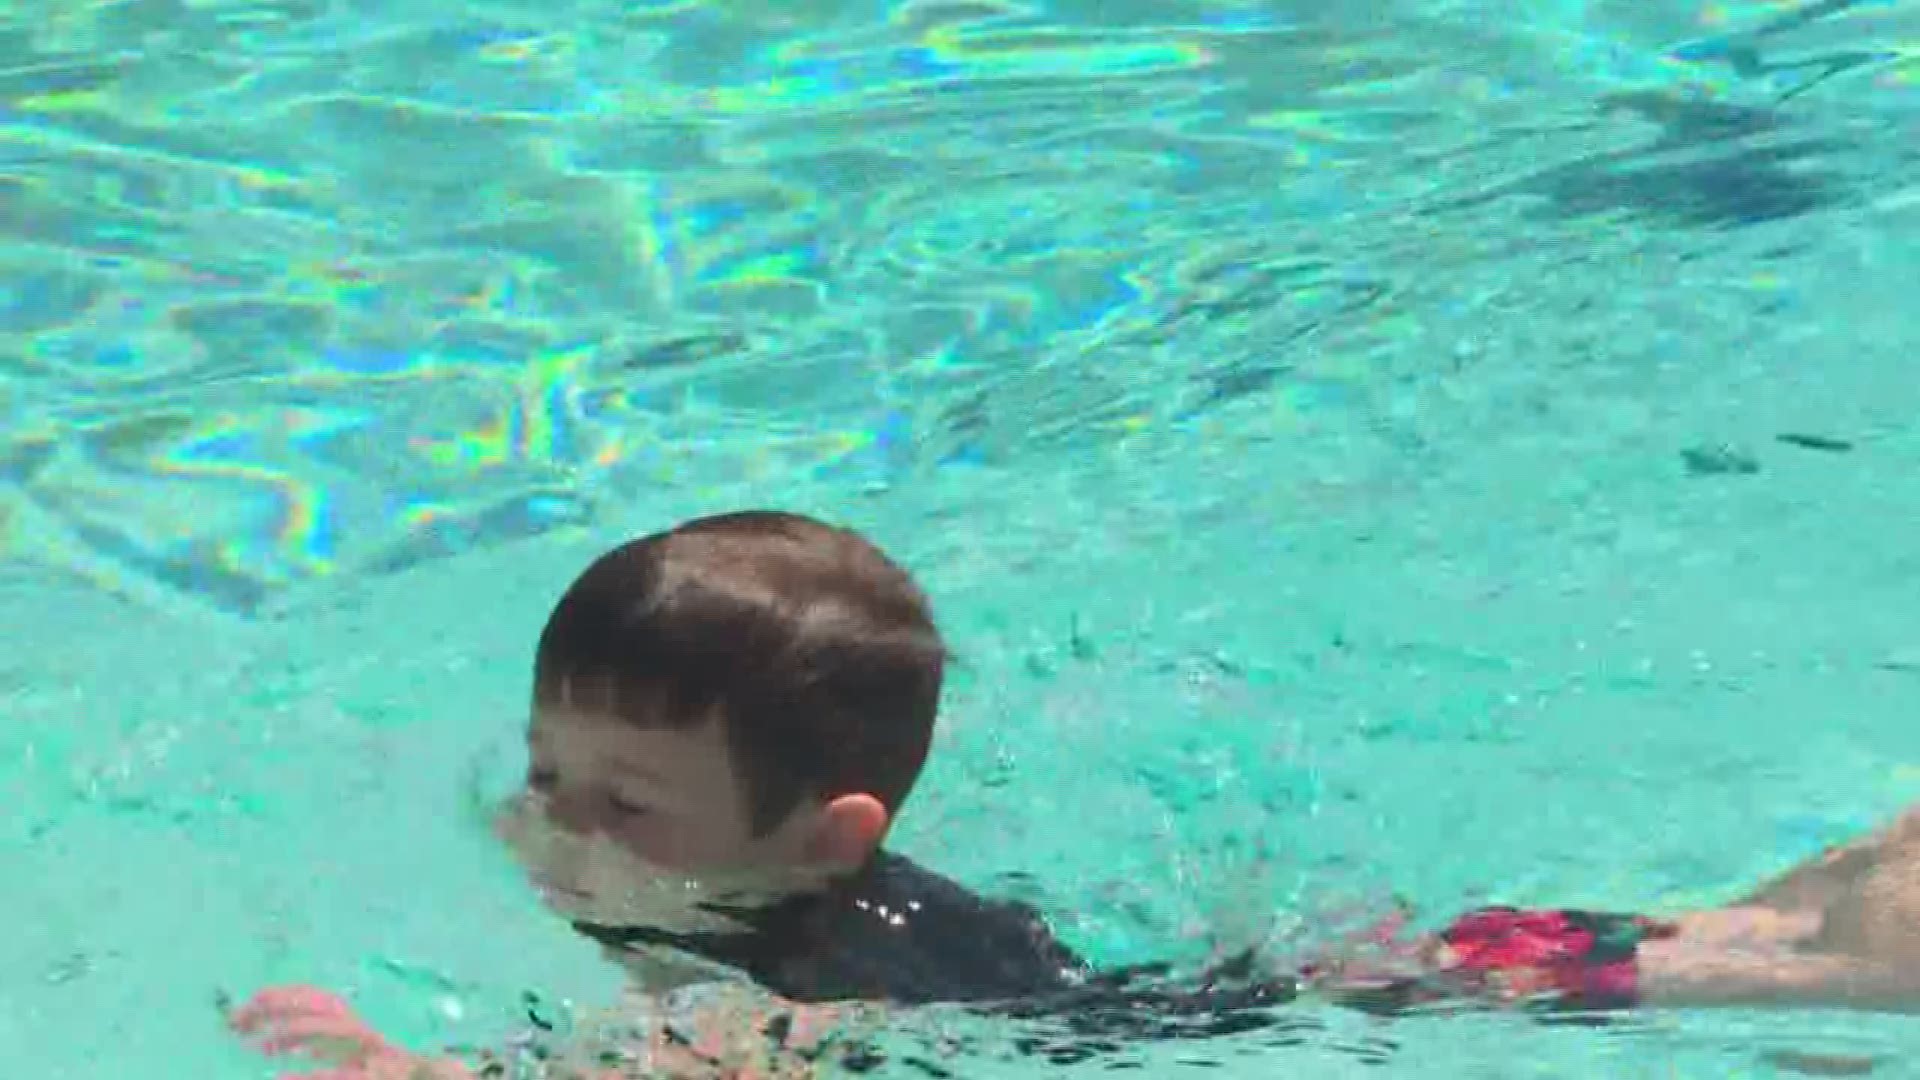 Kids that have had swimming lessons can sometimes give parents a false sense of security of their skill level when water is completely unpredictable.